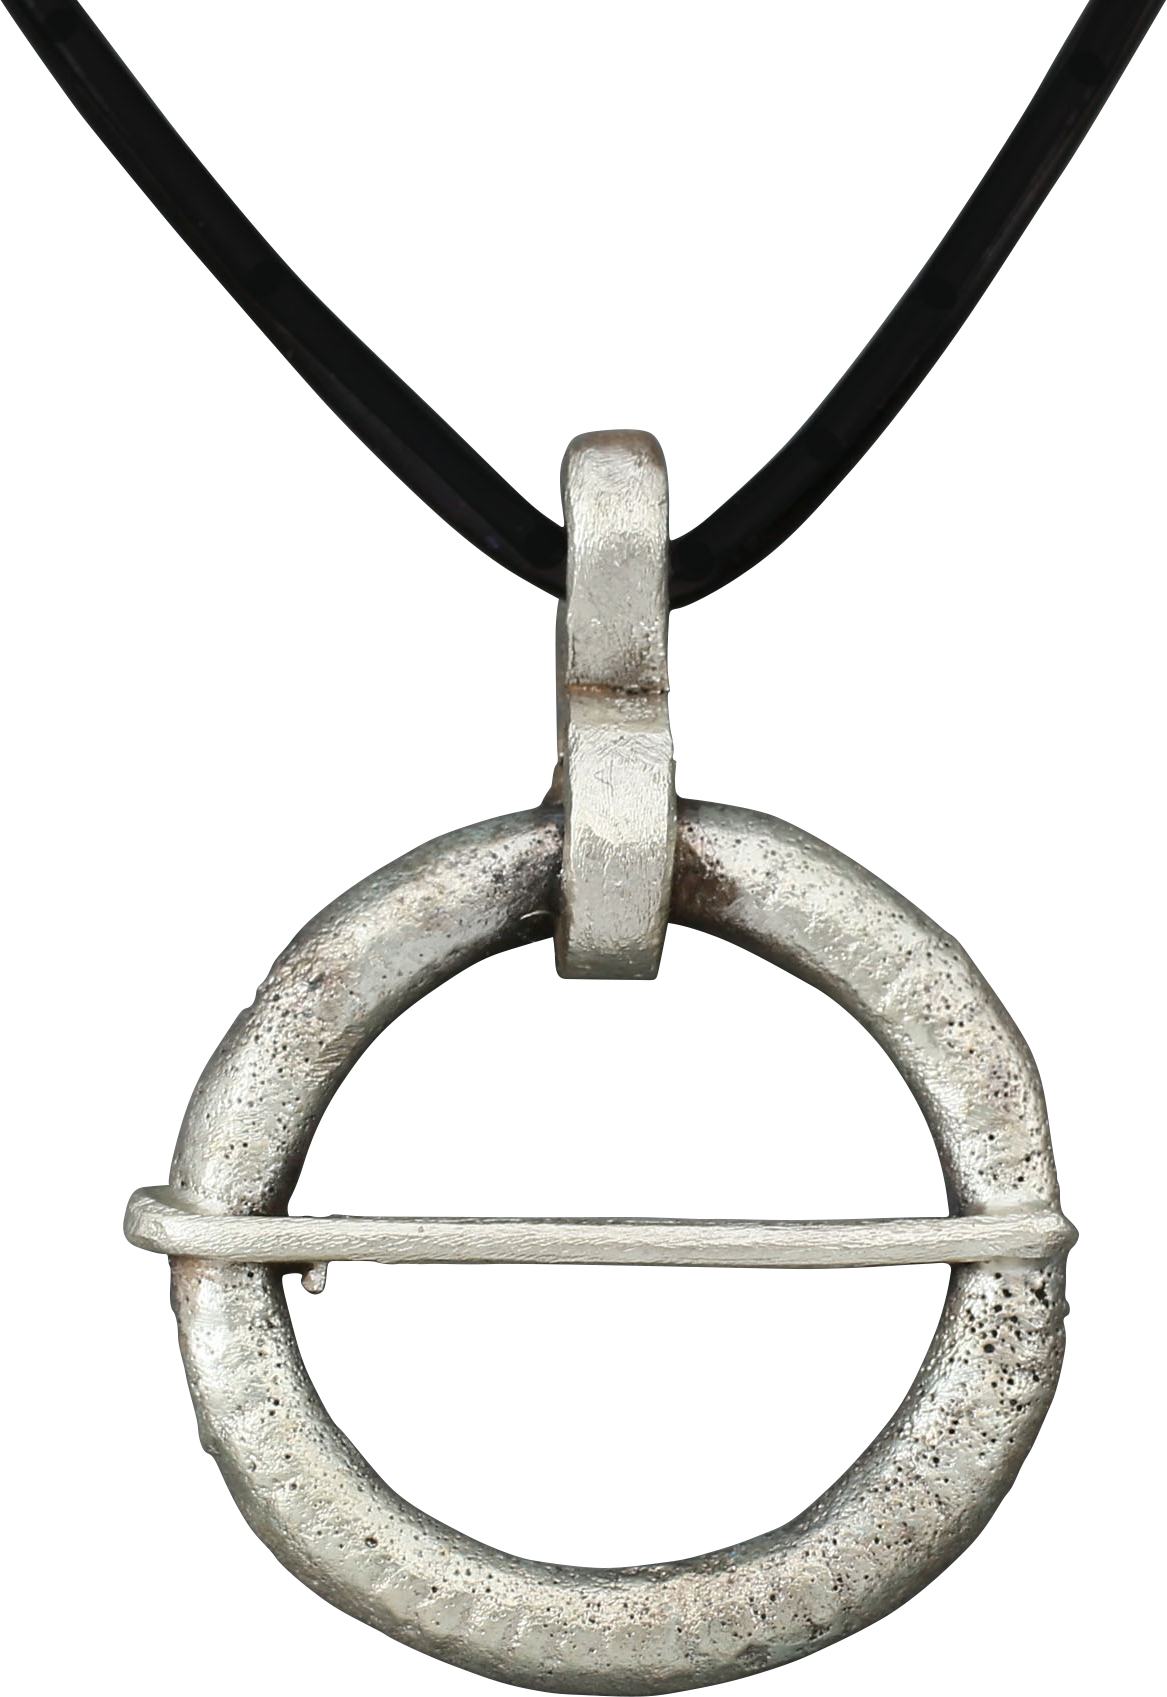 VIKING PROTECTIVE BROOCH NECKLACE, 9th-10th CENTURY AD - Fagan Arms